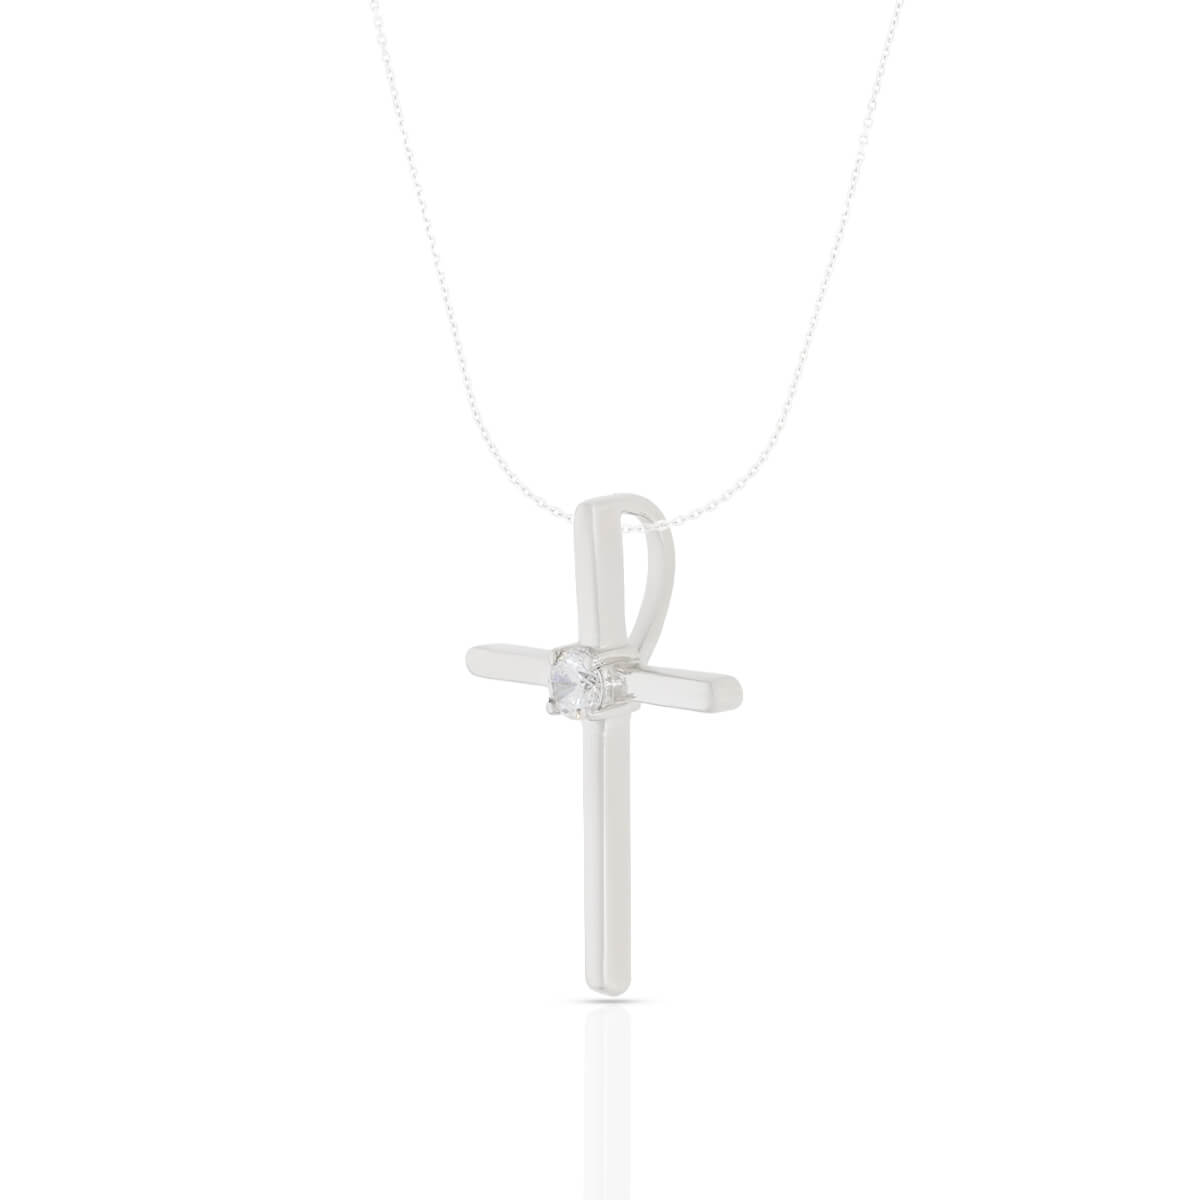 925 Sterling Silver Elegance Cross Pendant with Link Chain